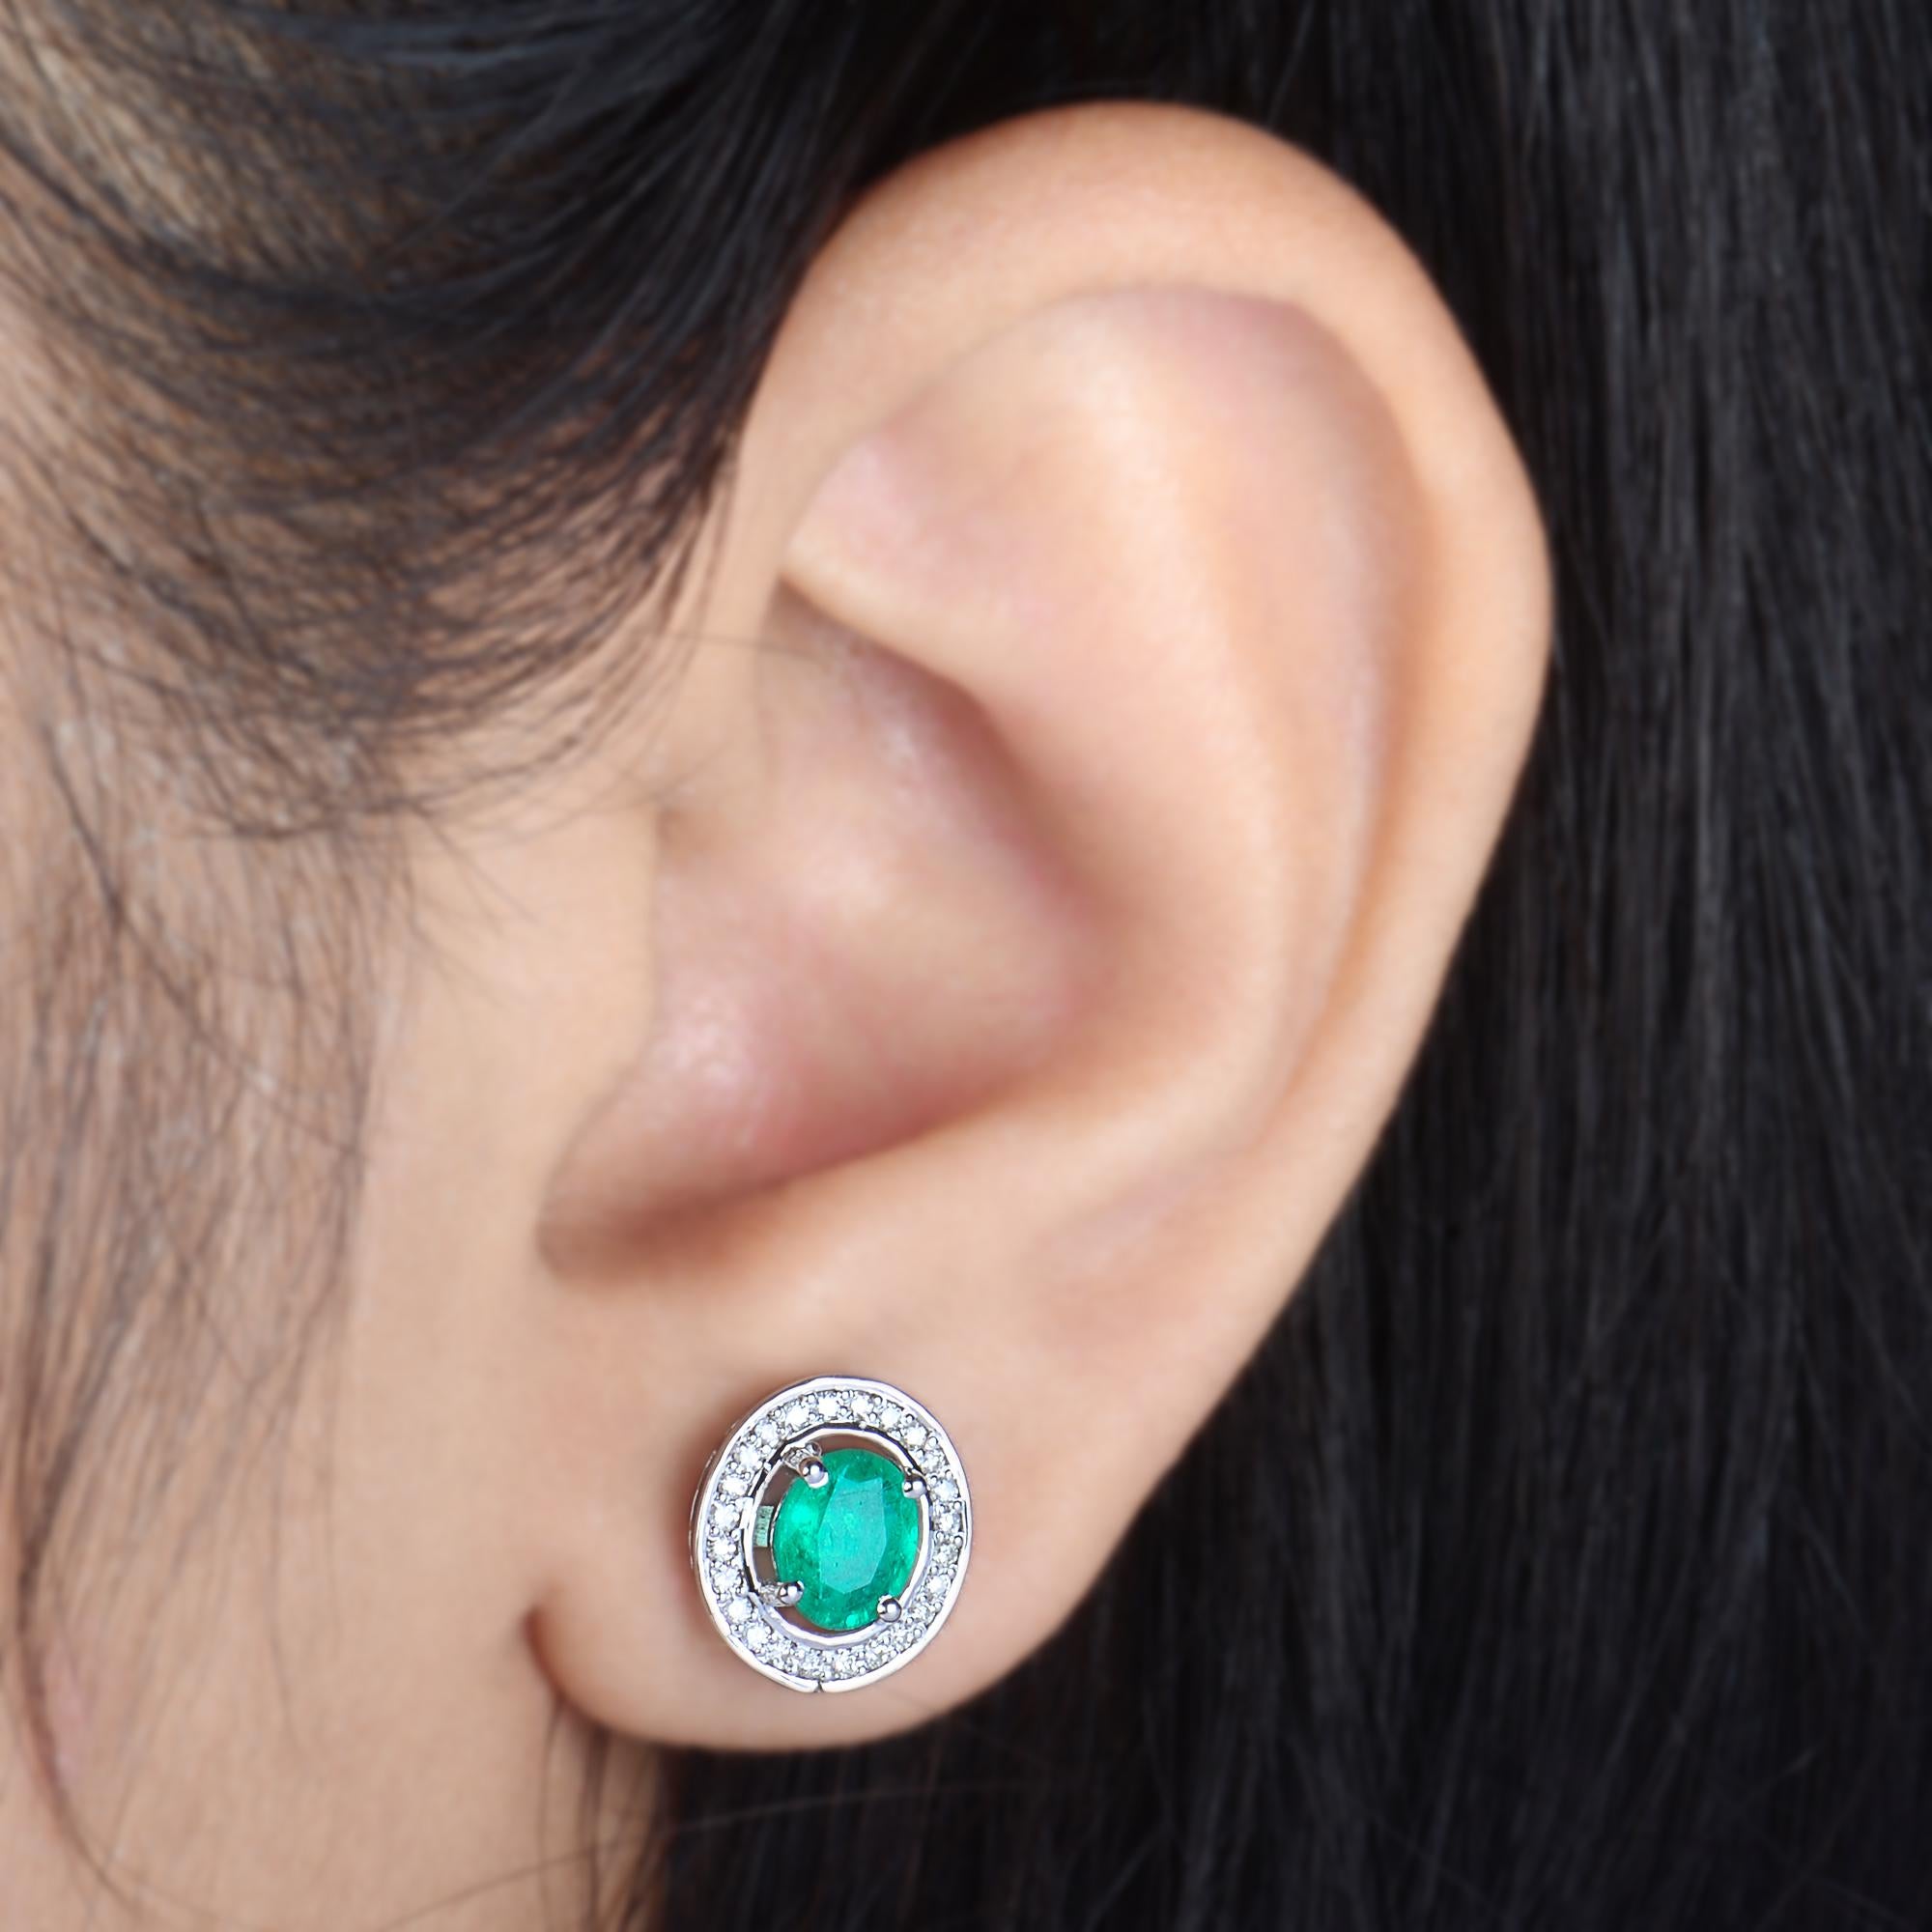 Oval Cut Natural Emerald Gemstone Stud Earrings Diamond Solid 10k White Gold Fine Jewelry For Sale